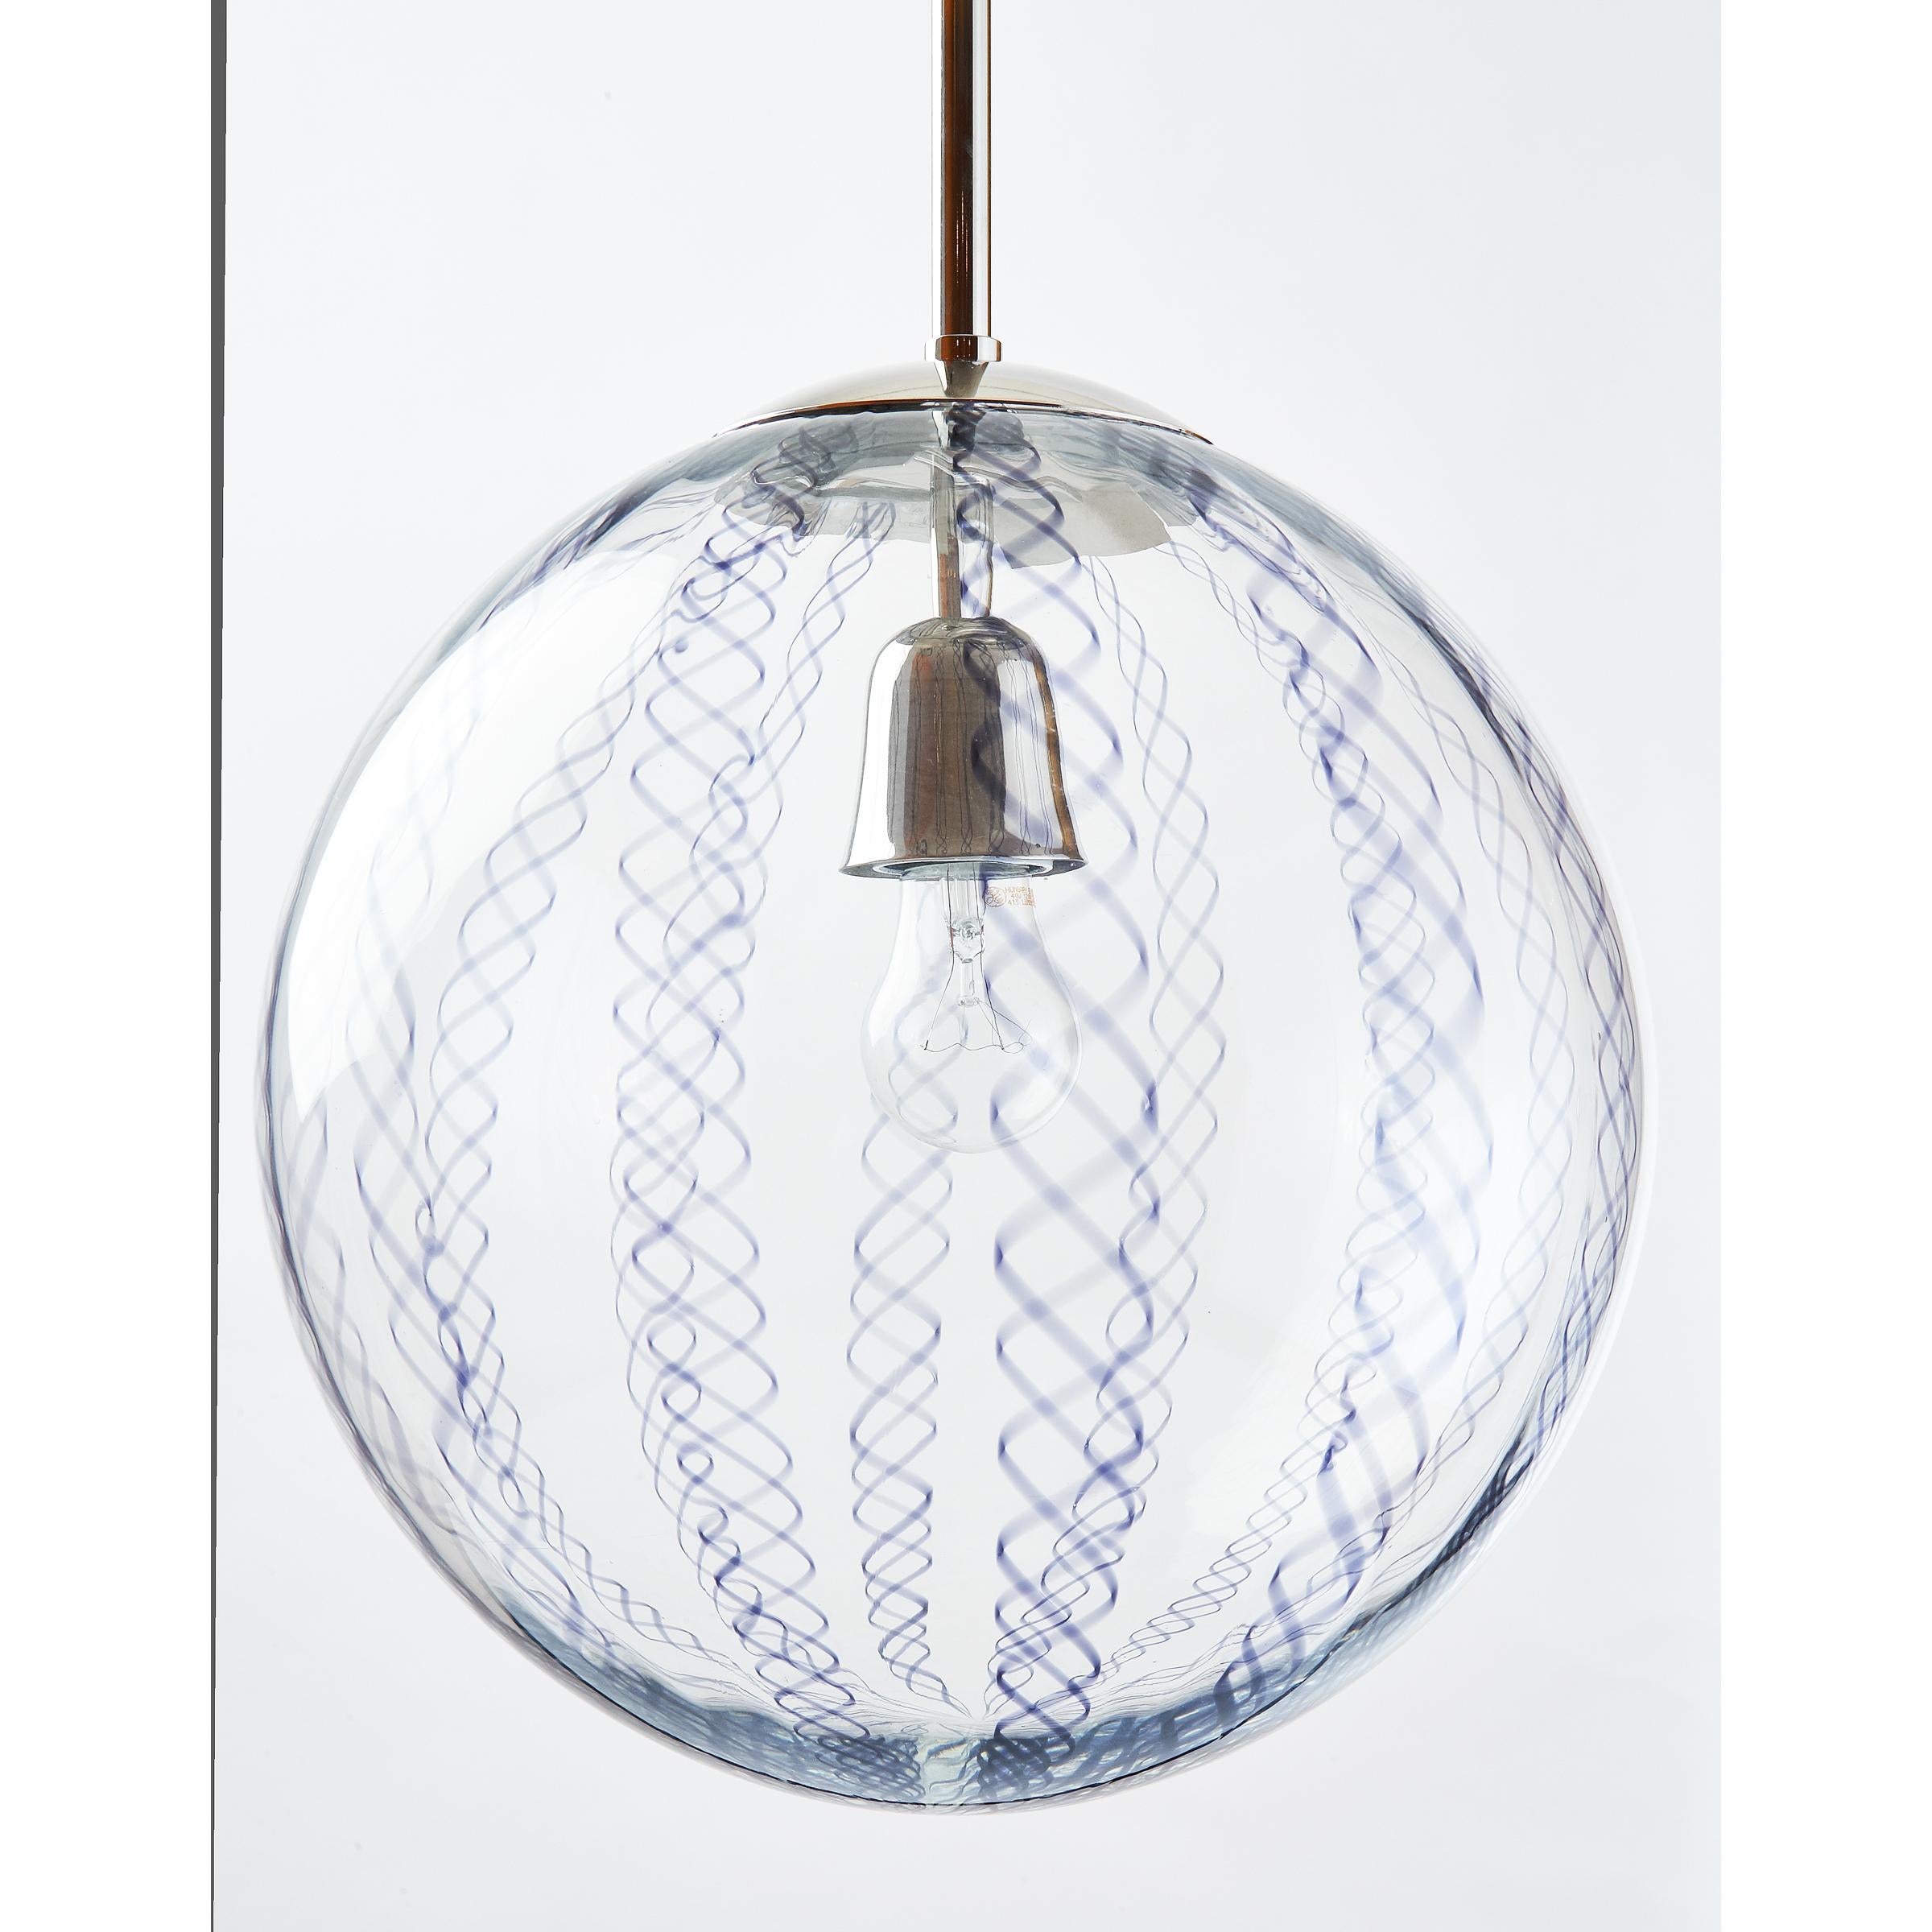 Venini, Italy 1950's
A blown clear glass lantern with delicate woven spiral patterns in colored Zanfirico glass; nickeled mounts
Measures: 12 diameter x 38 height ( Height can be adjusted )
Rewired for use in the USA with one standard base bulb.